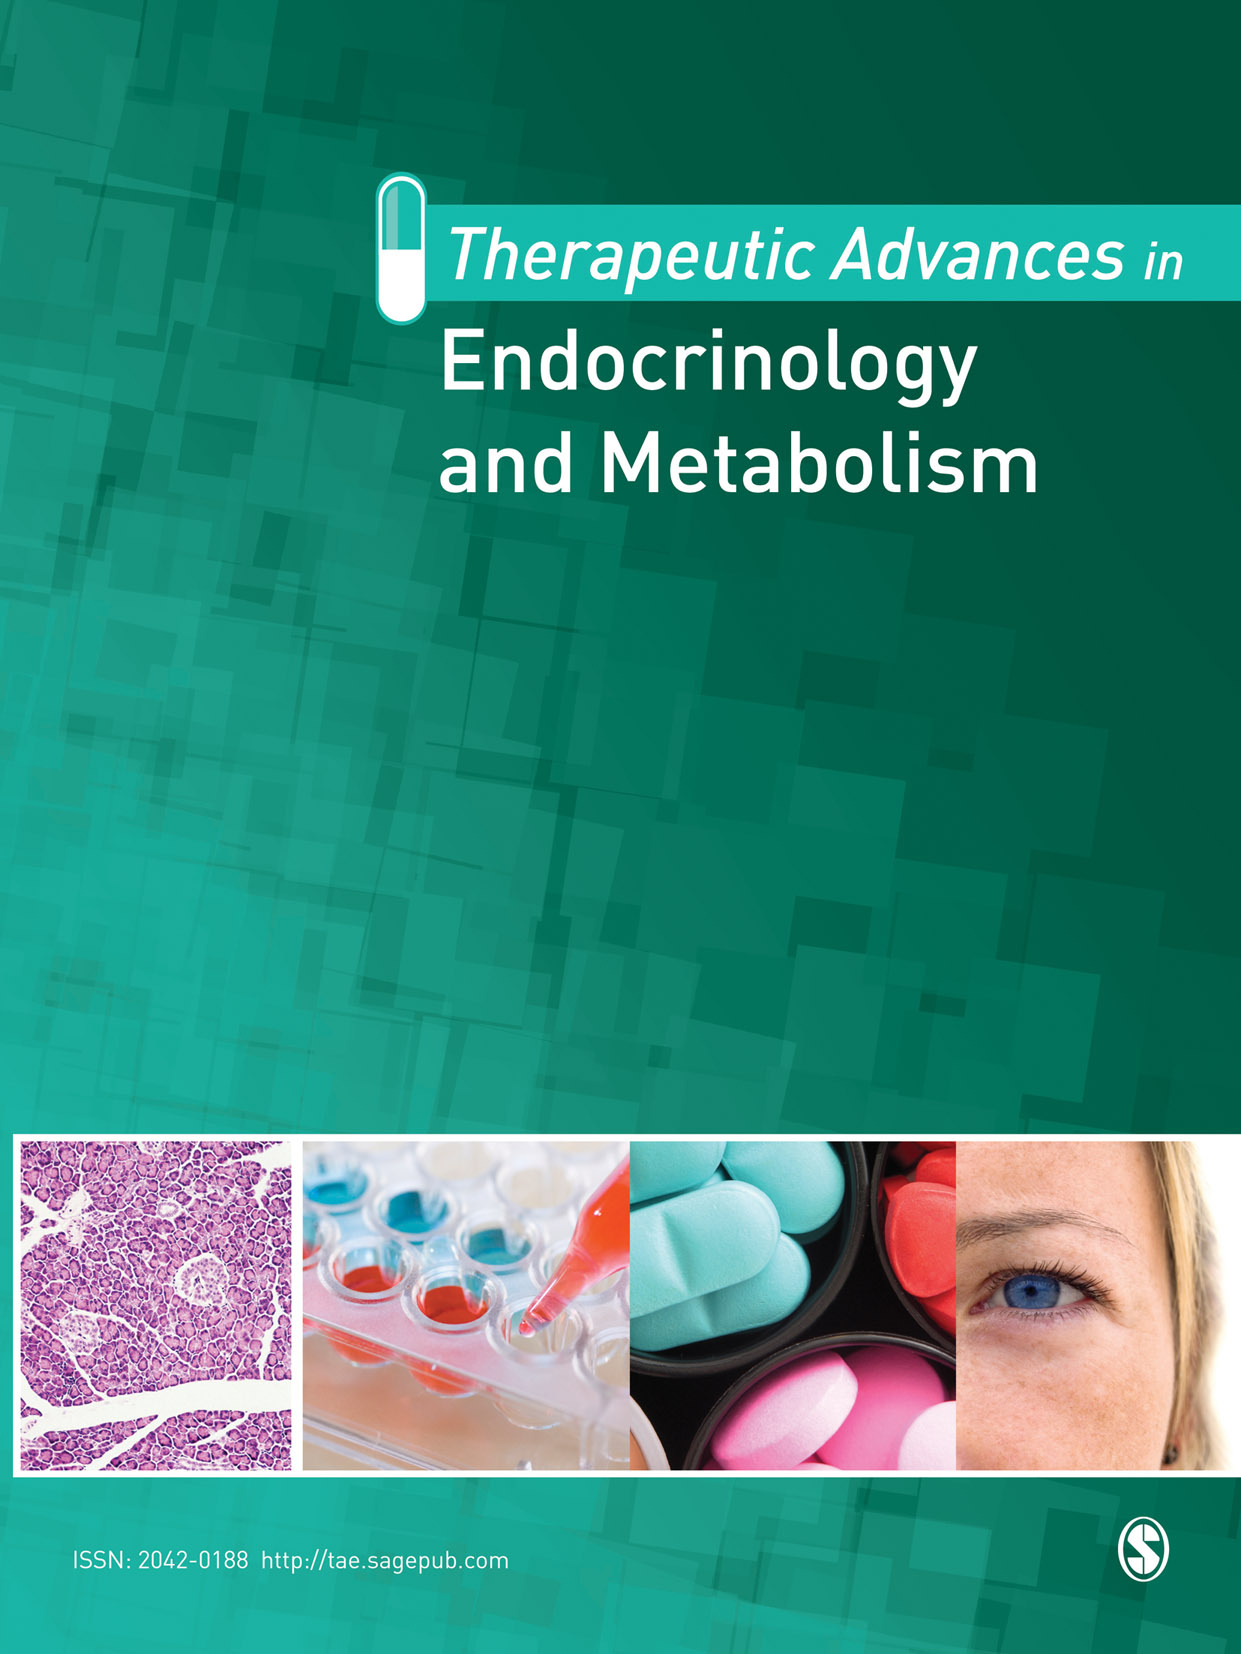  Therapeutic Advances in Endocrinology and Metabolism